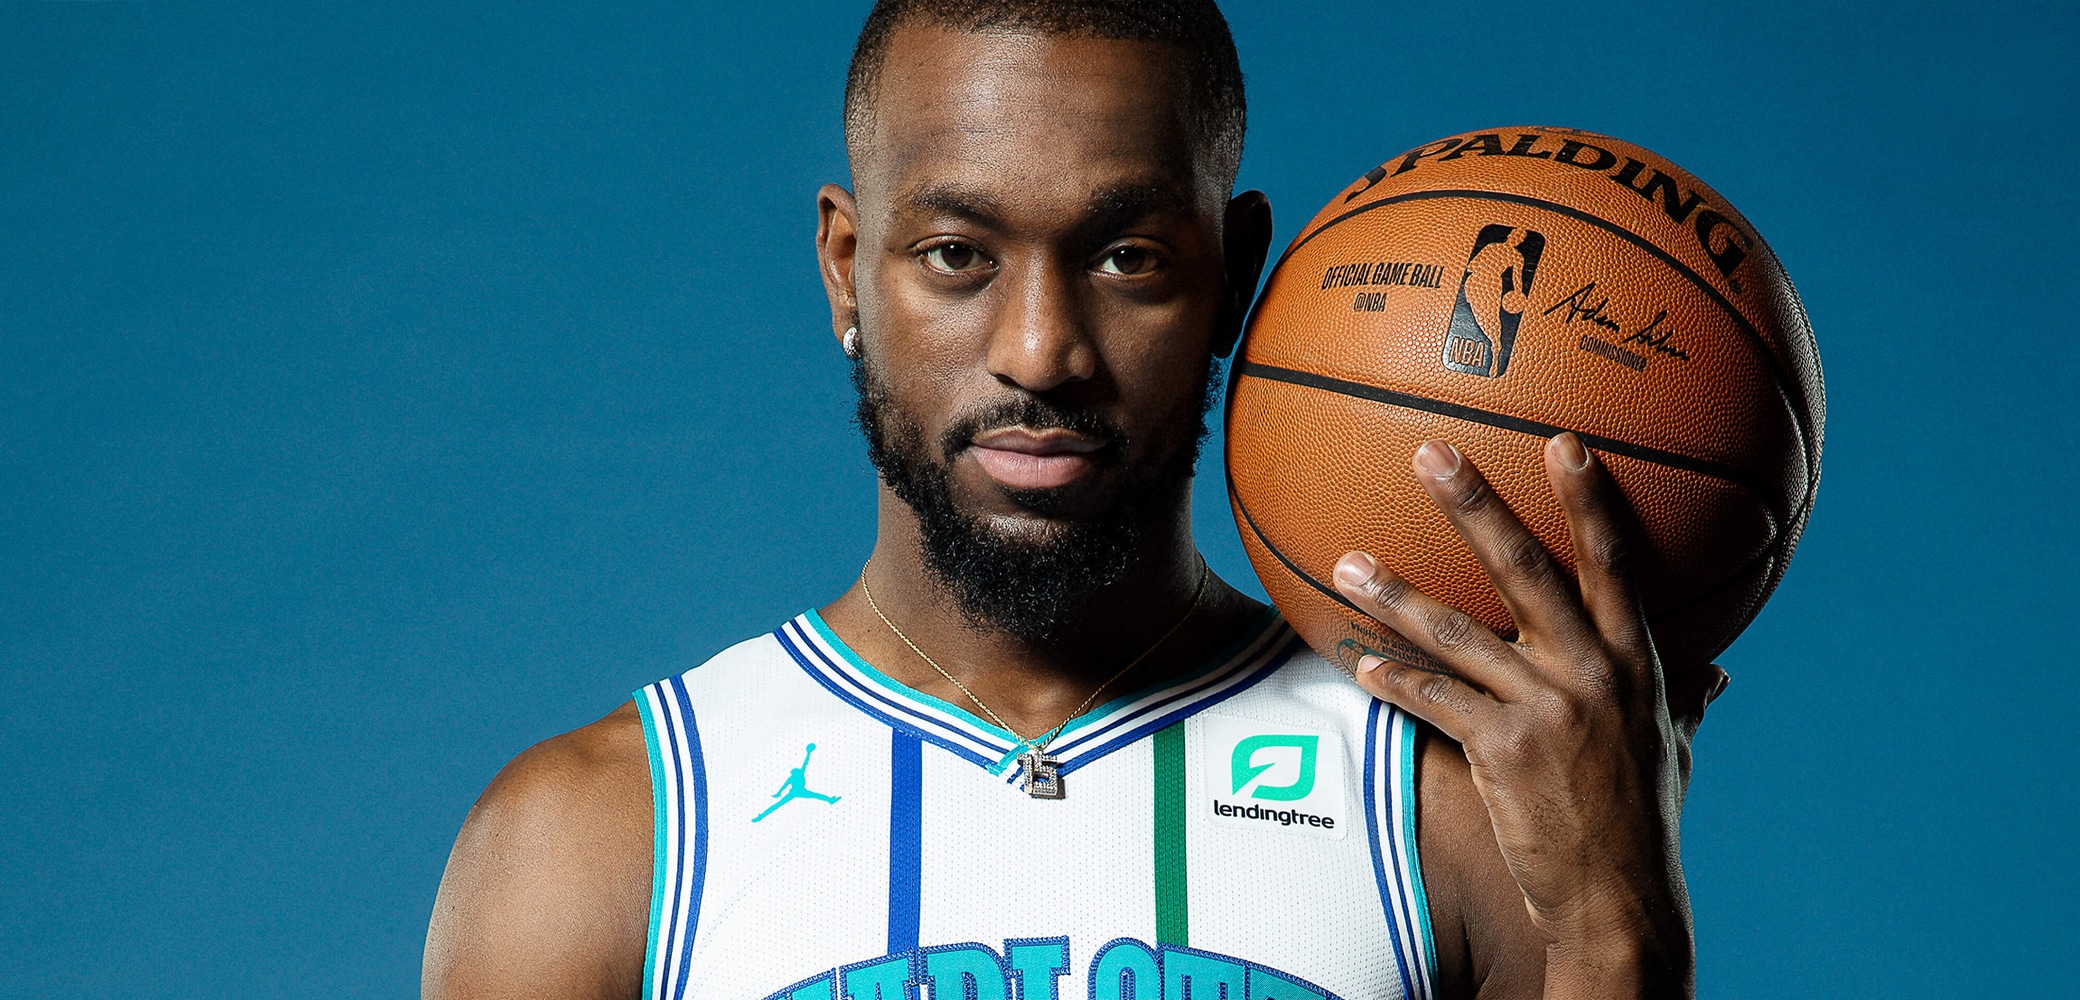 If You Don't Know, Now You Know: Kemba Walker Is a Certified Superstar ð£